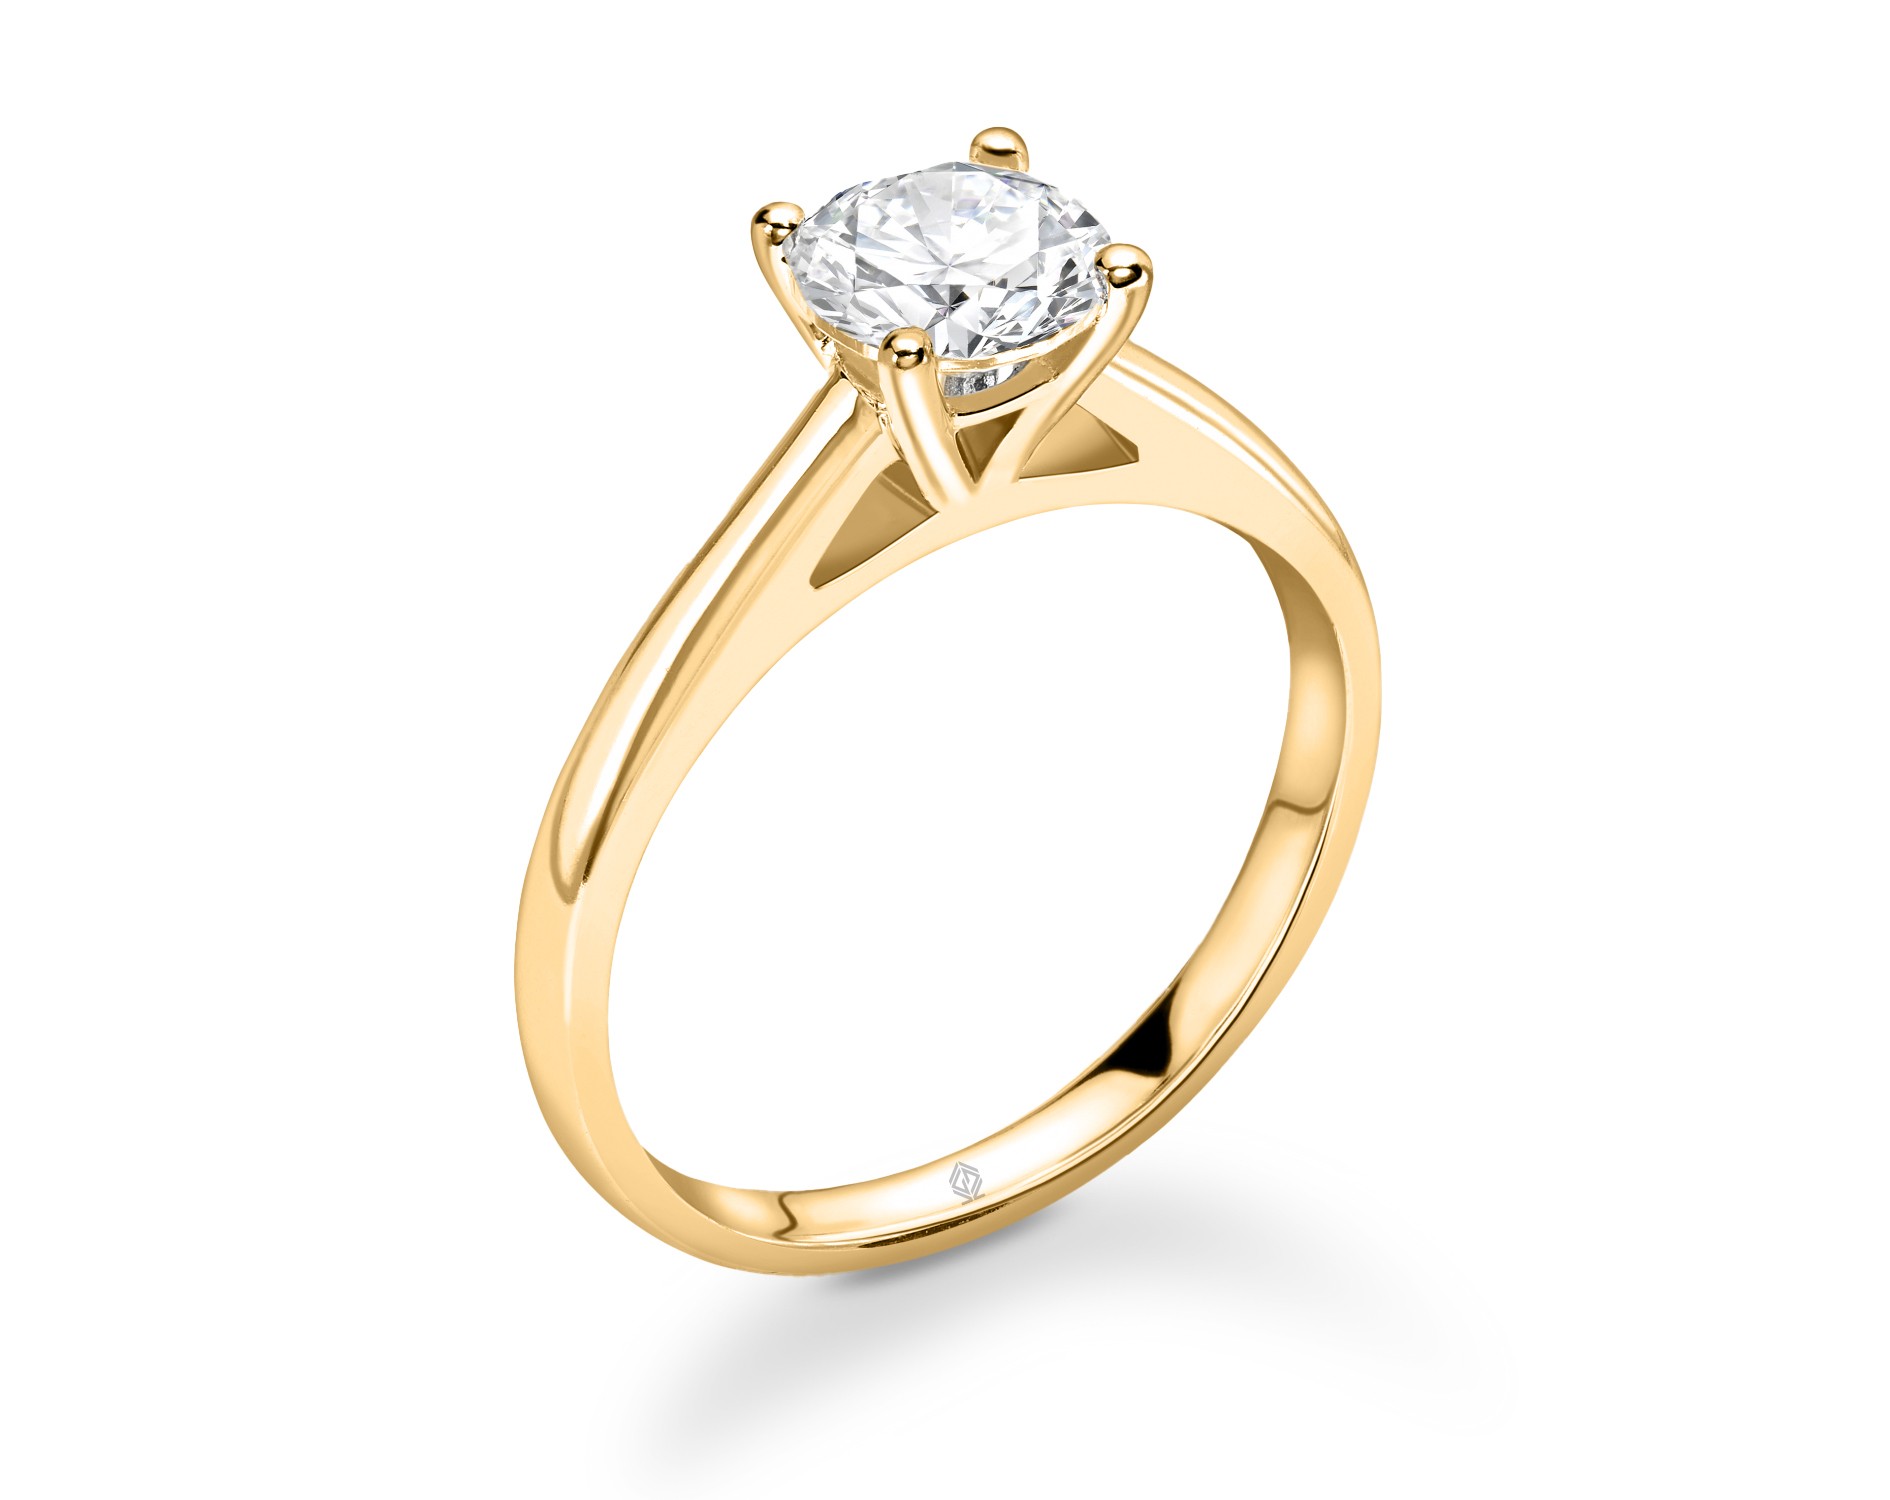 18K YELLOW GOLD 4 PRONGS HEAD SOLITAIRE ROUND CUT DIAMOND ENGAGEMENT RING